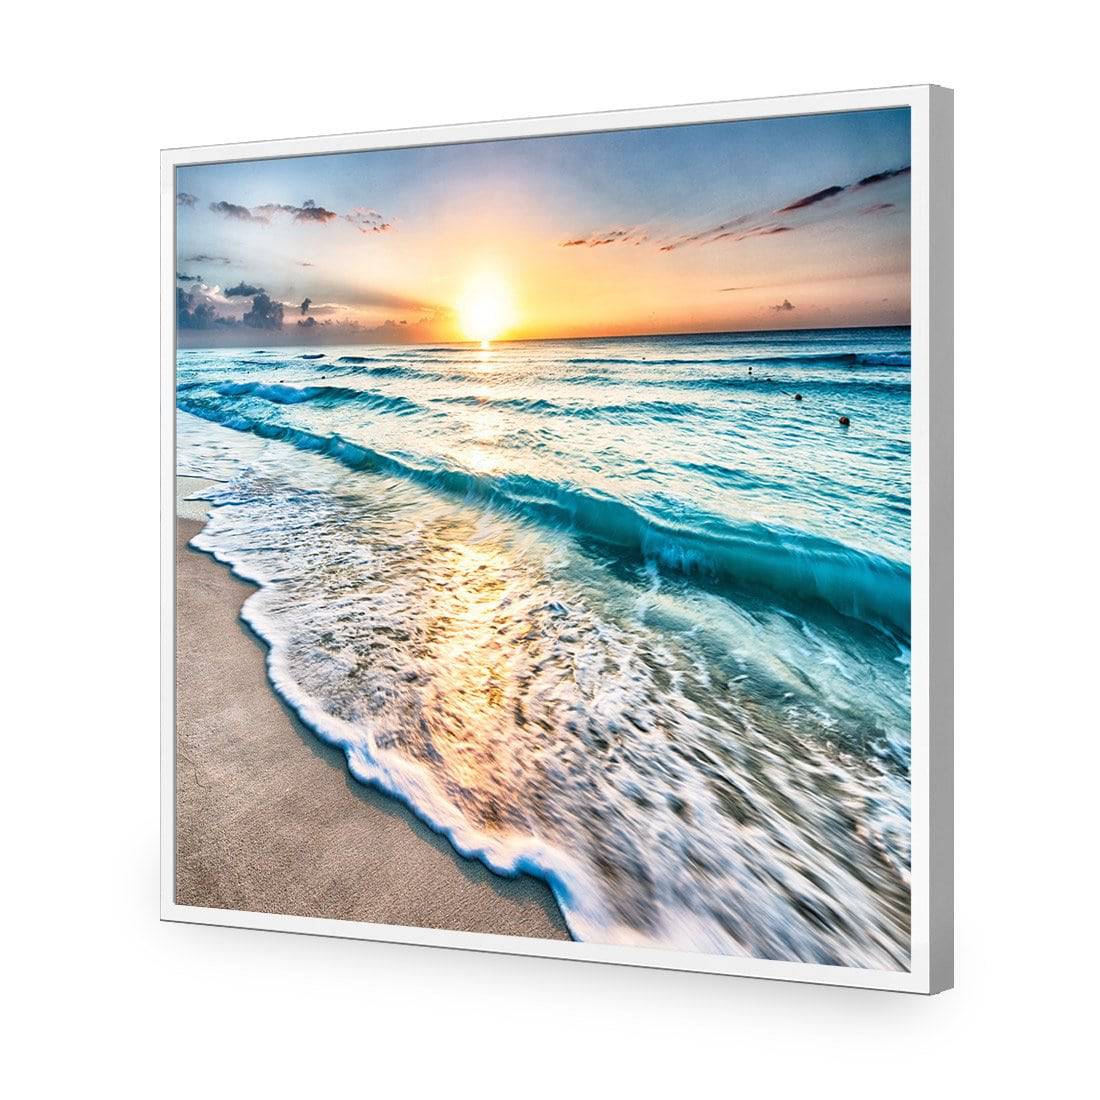 Glimmering Sunrise, Square-Acrylic-Wall Art Design-Without Border-Acrylic - White Frame-37x37cm-Wall Art Designs